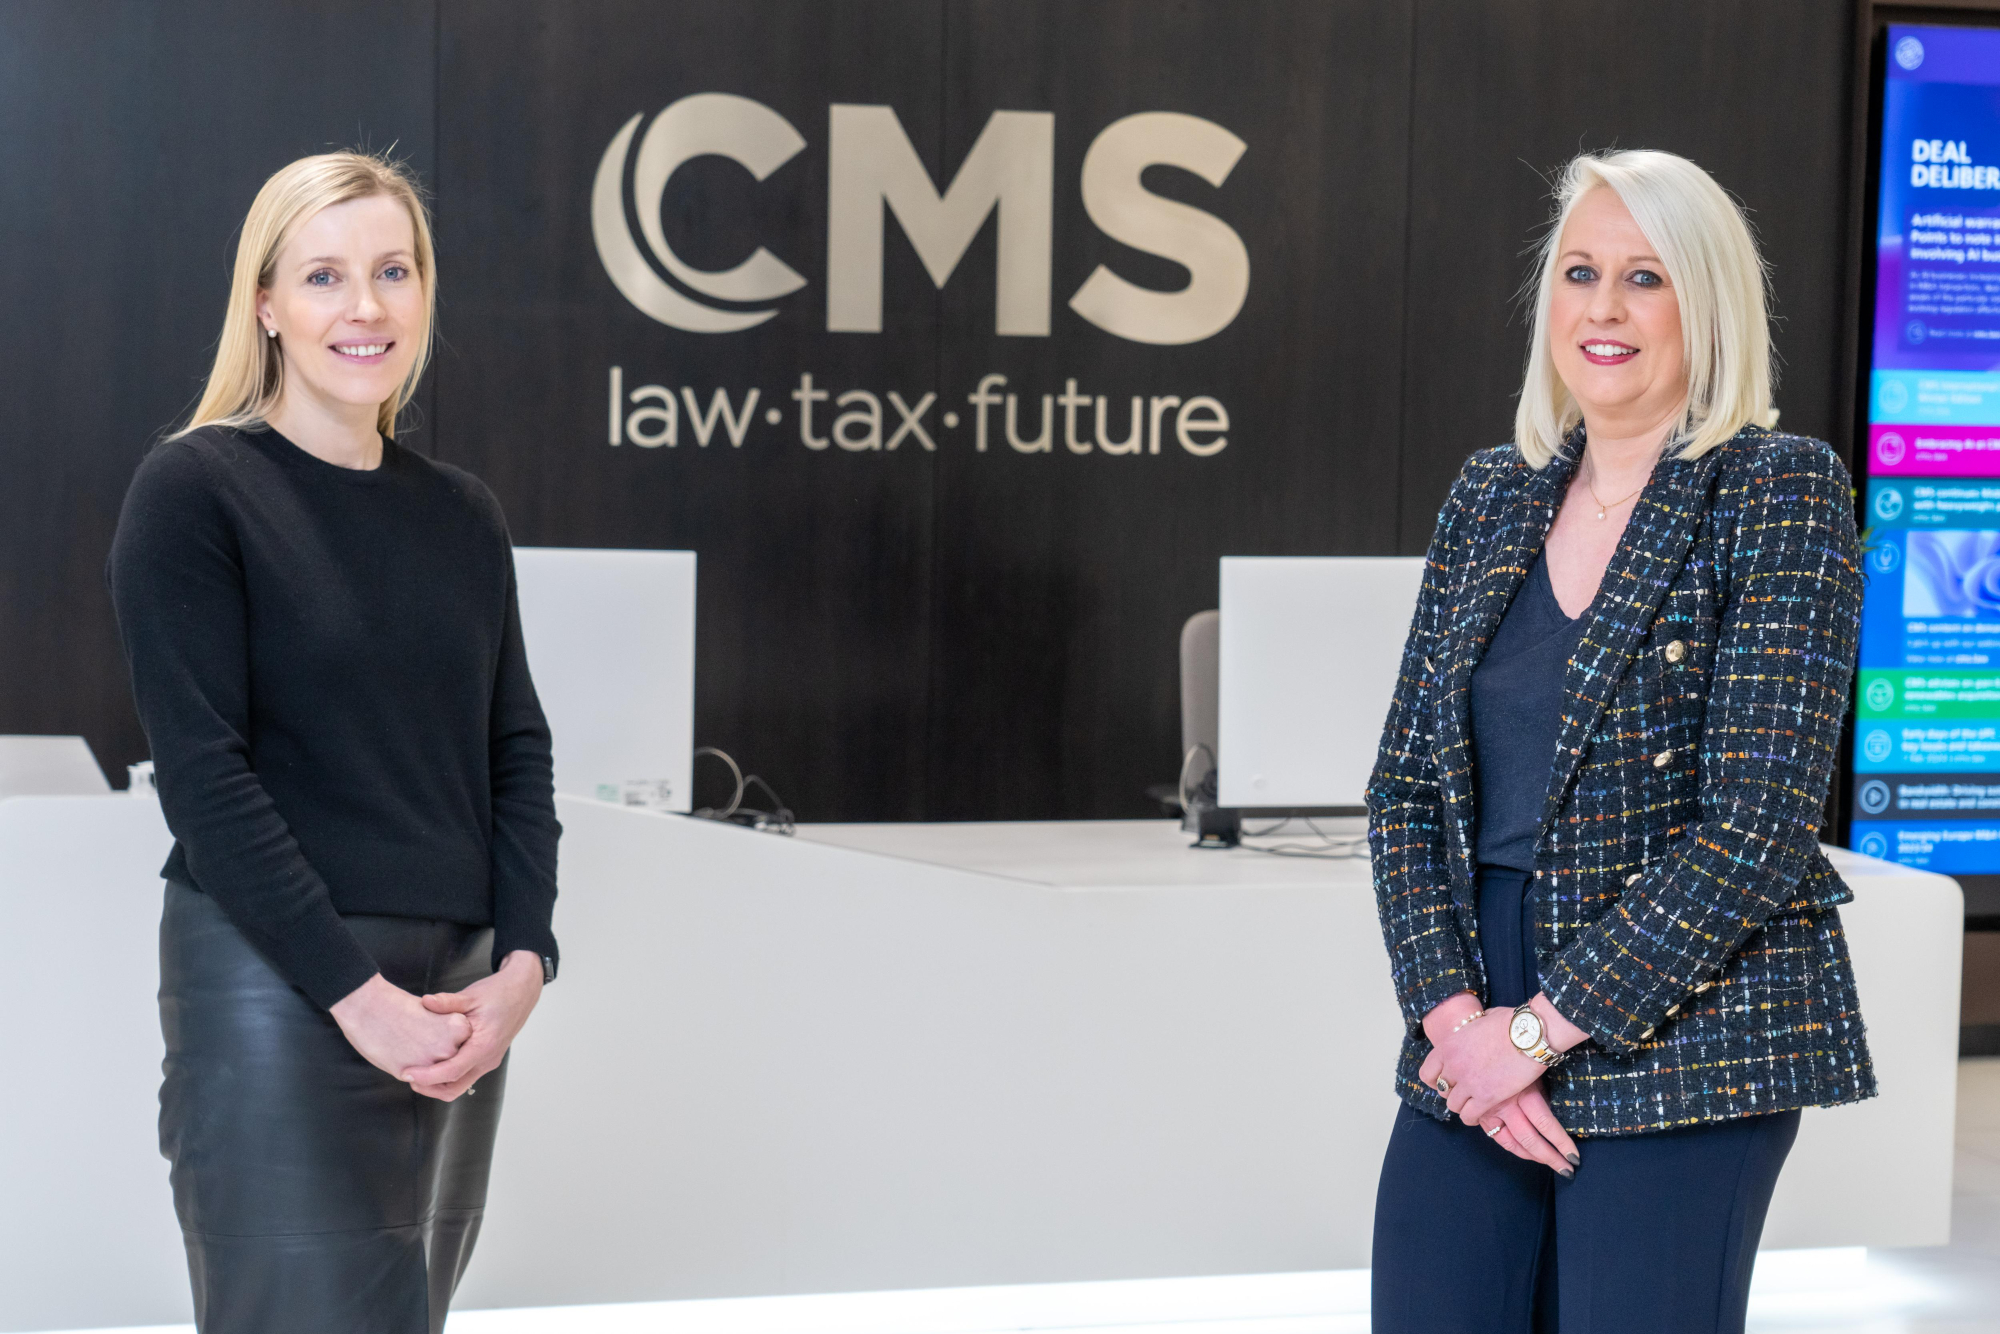 Amy Cornelius and Lizzie Gray join CMS